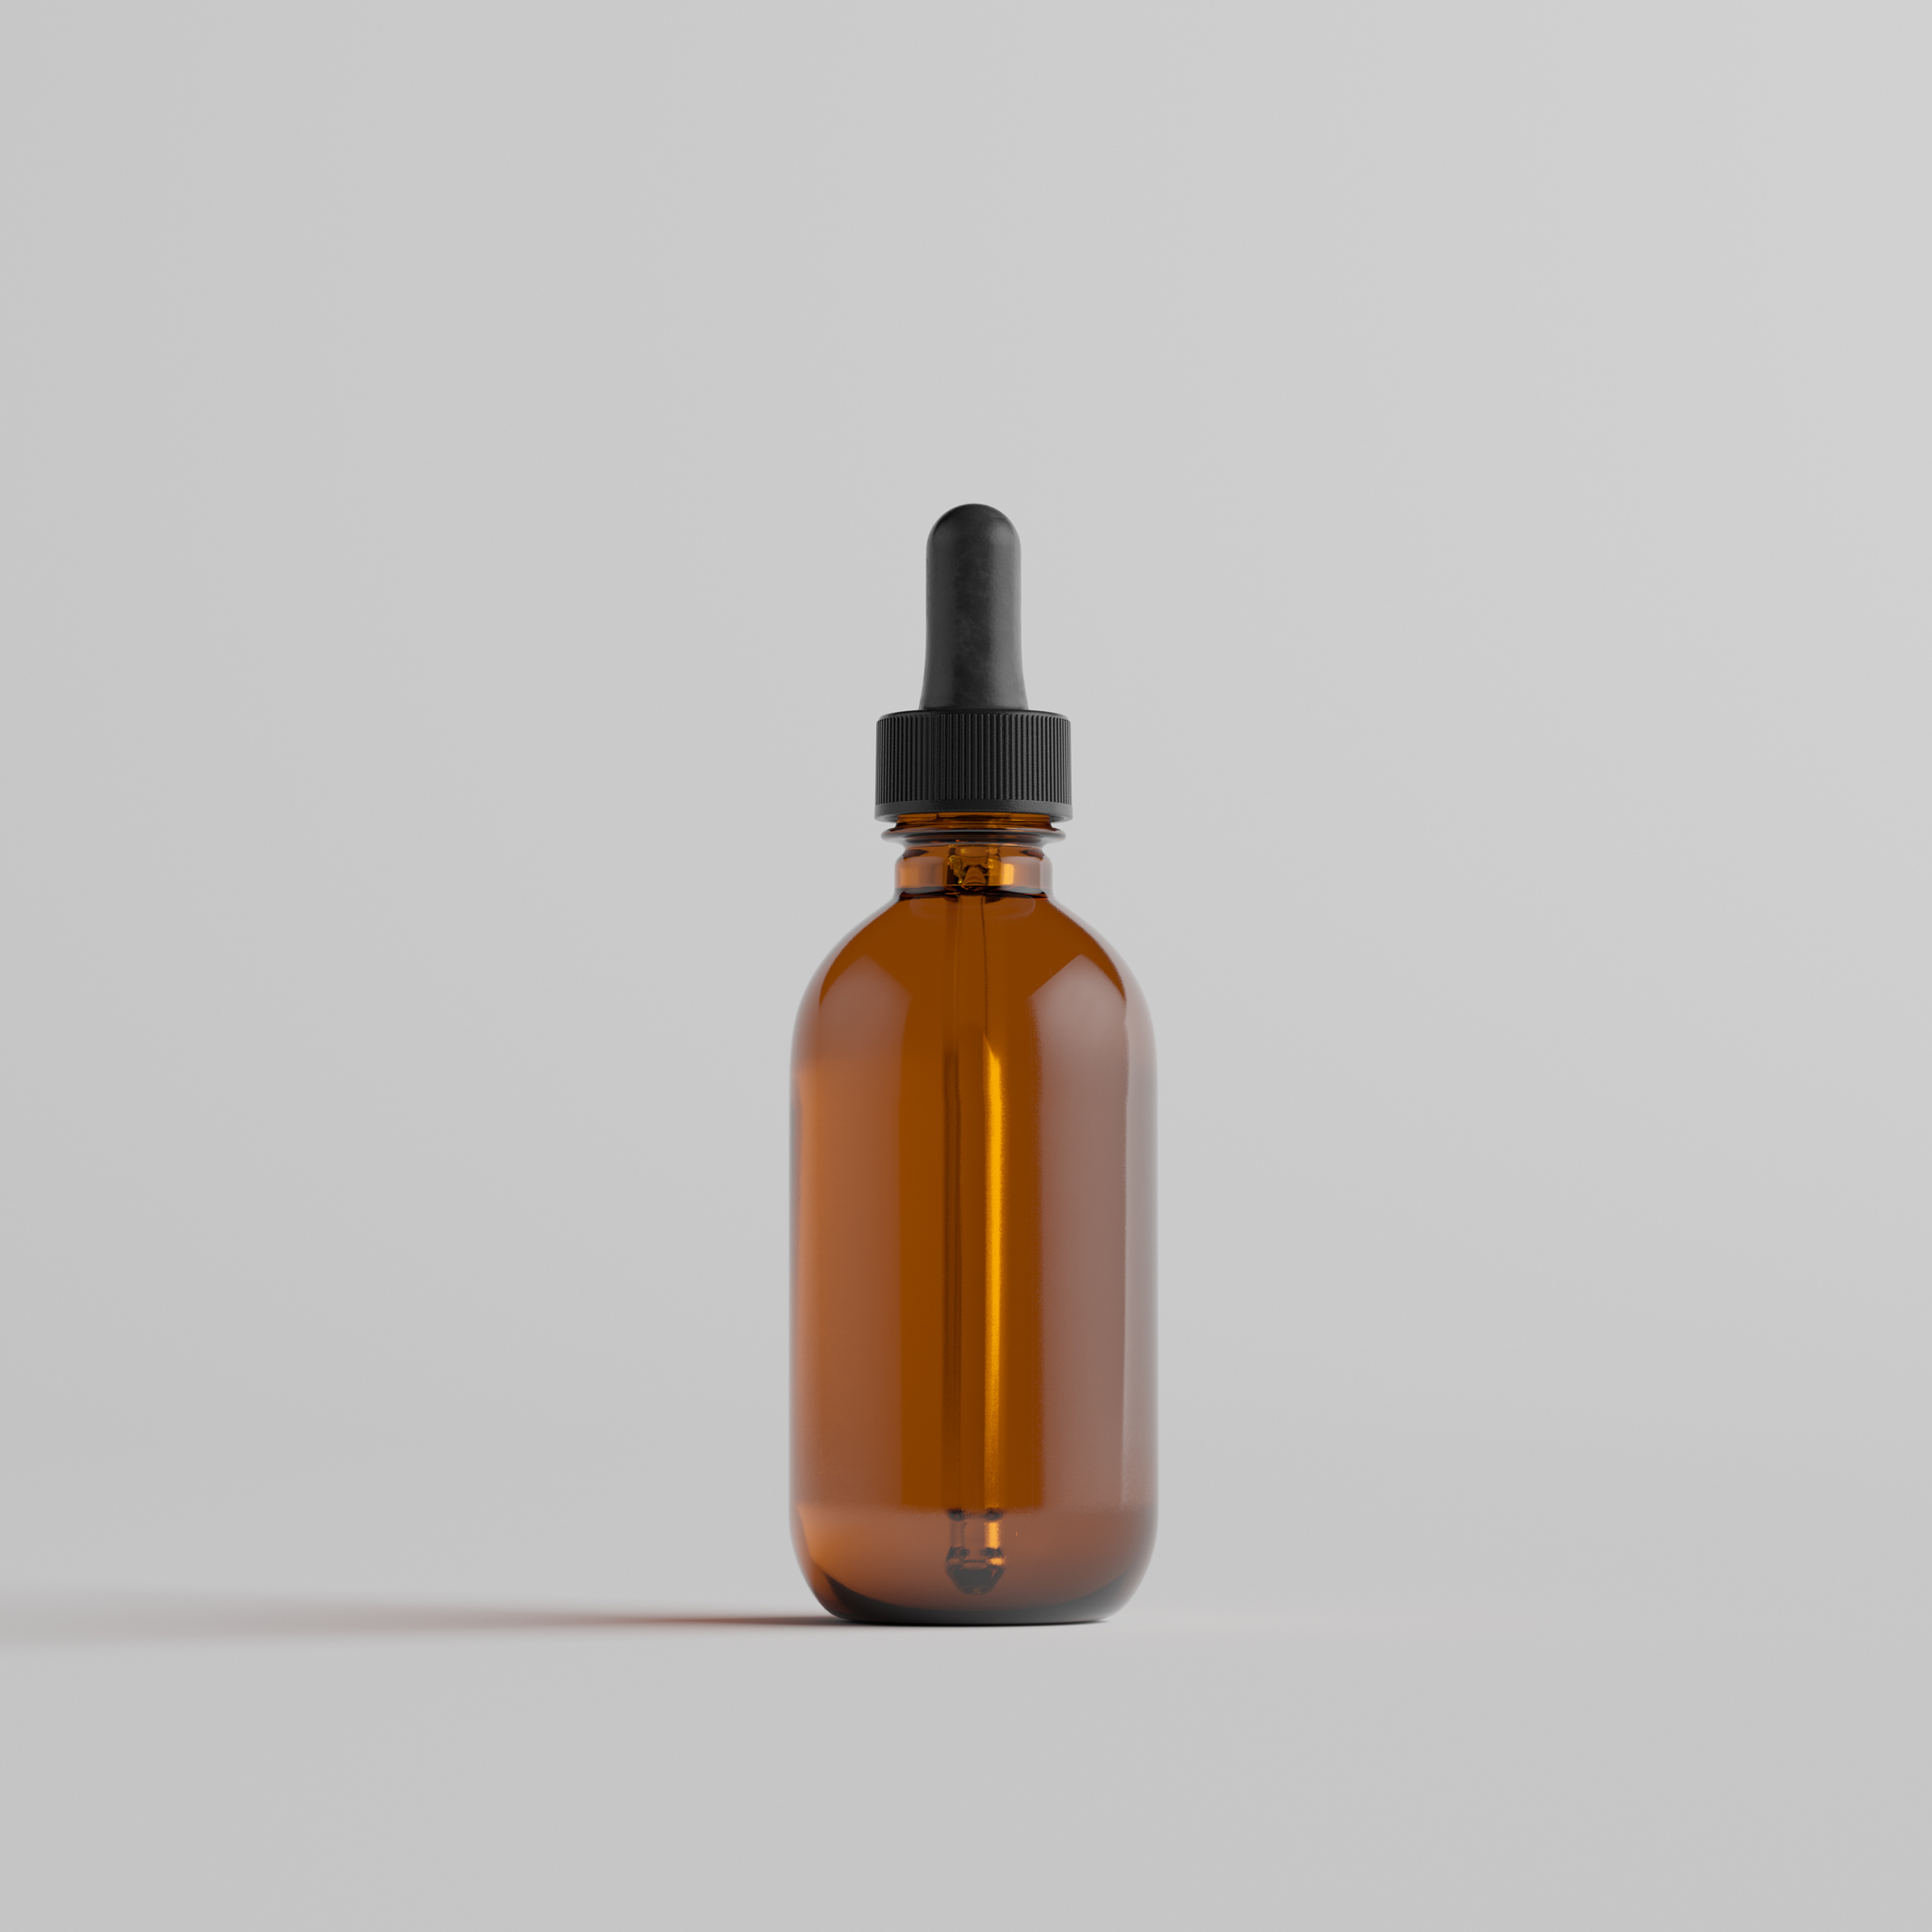 purely sunnah private label beard oil